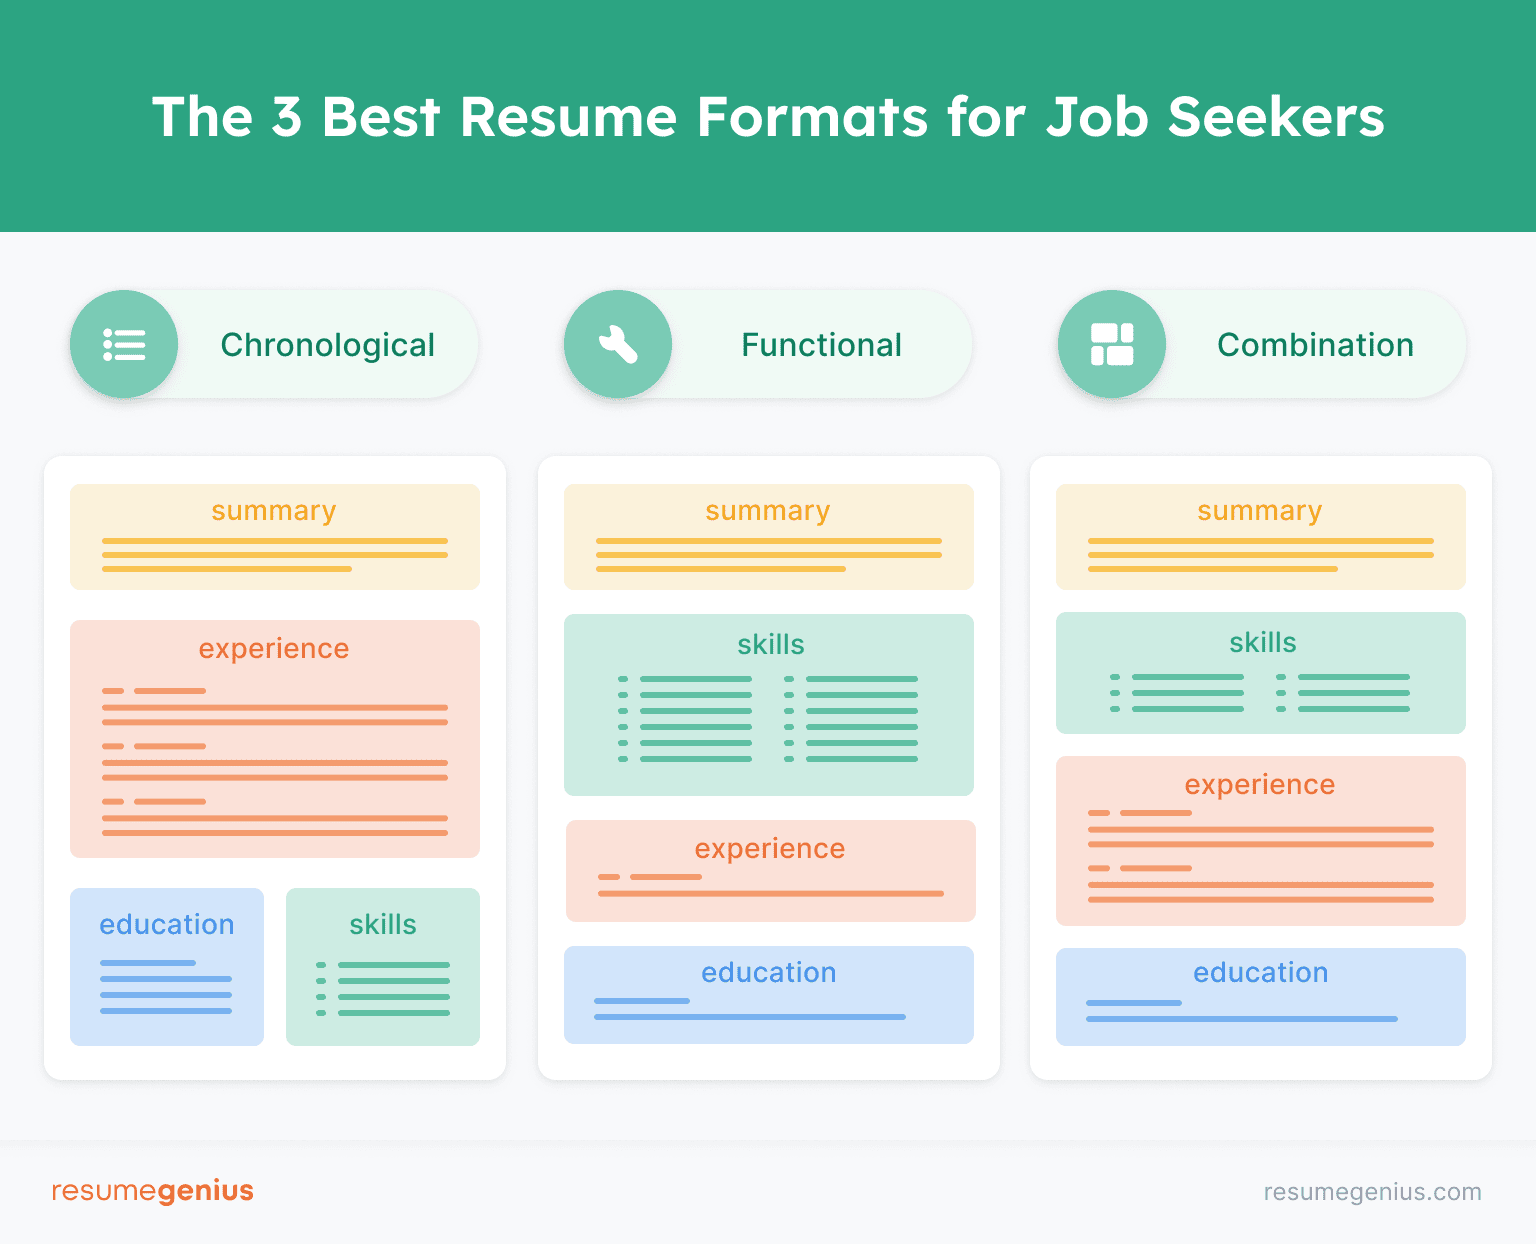 Illustration of the three main resume formats: chronological, functional, and combination